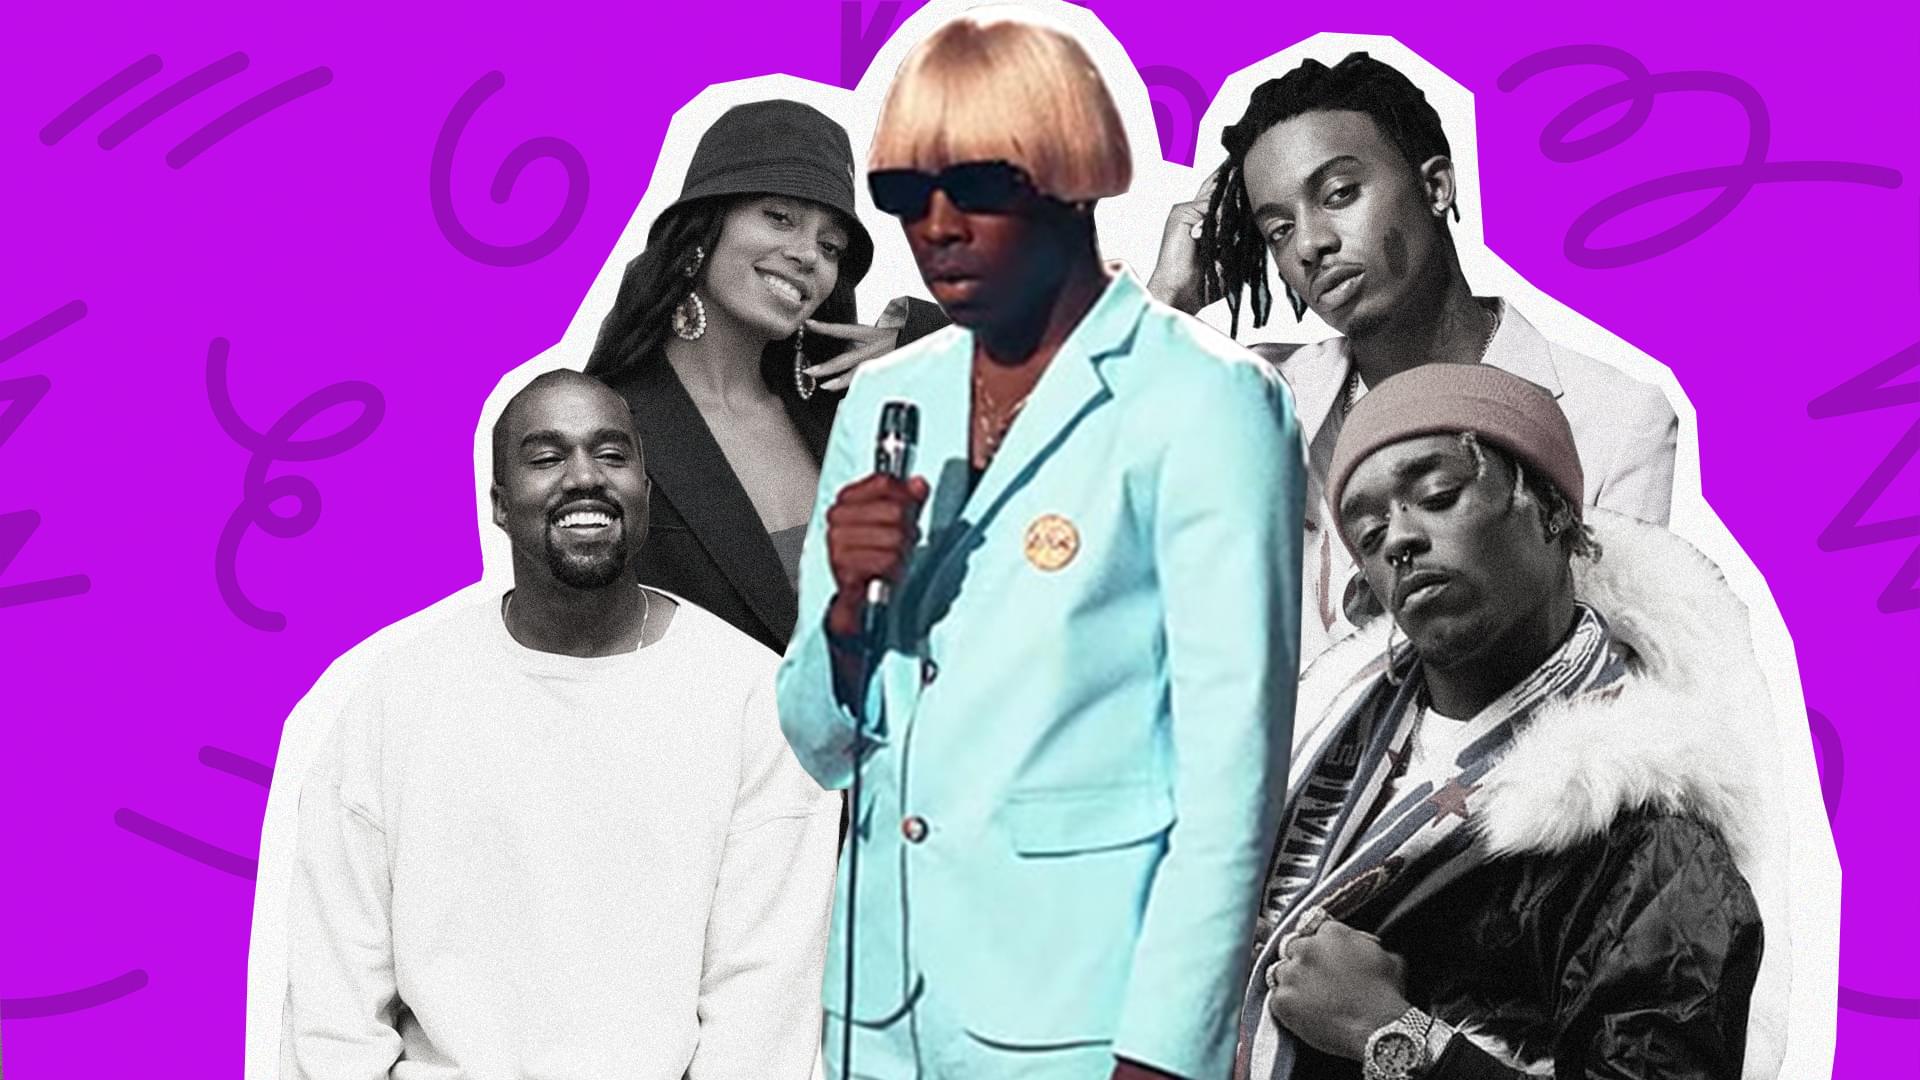 A Guide To All The Collaborators On Tyler, The Creator's New Album